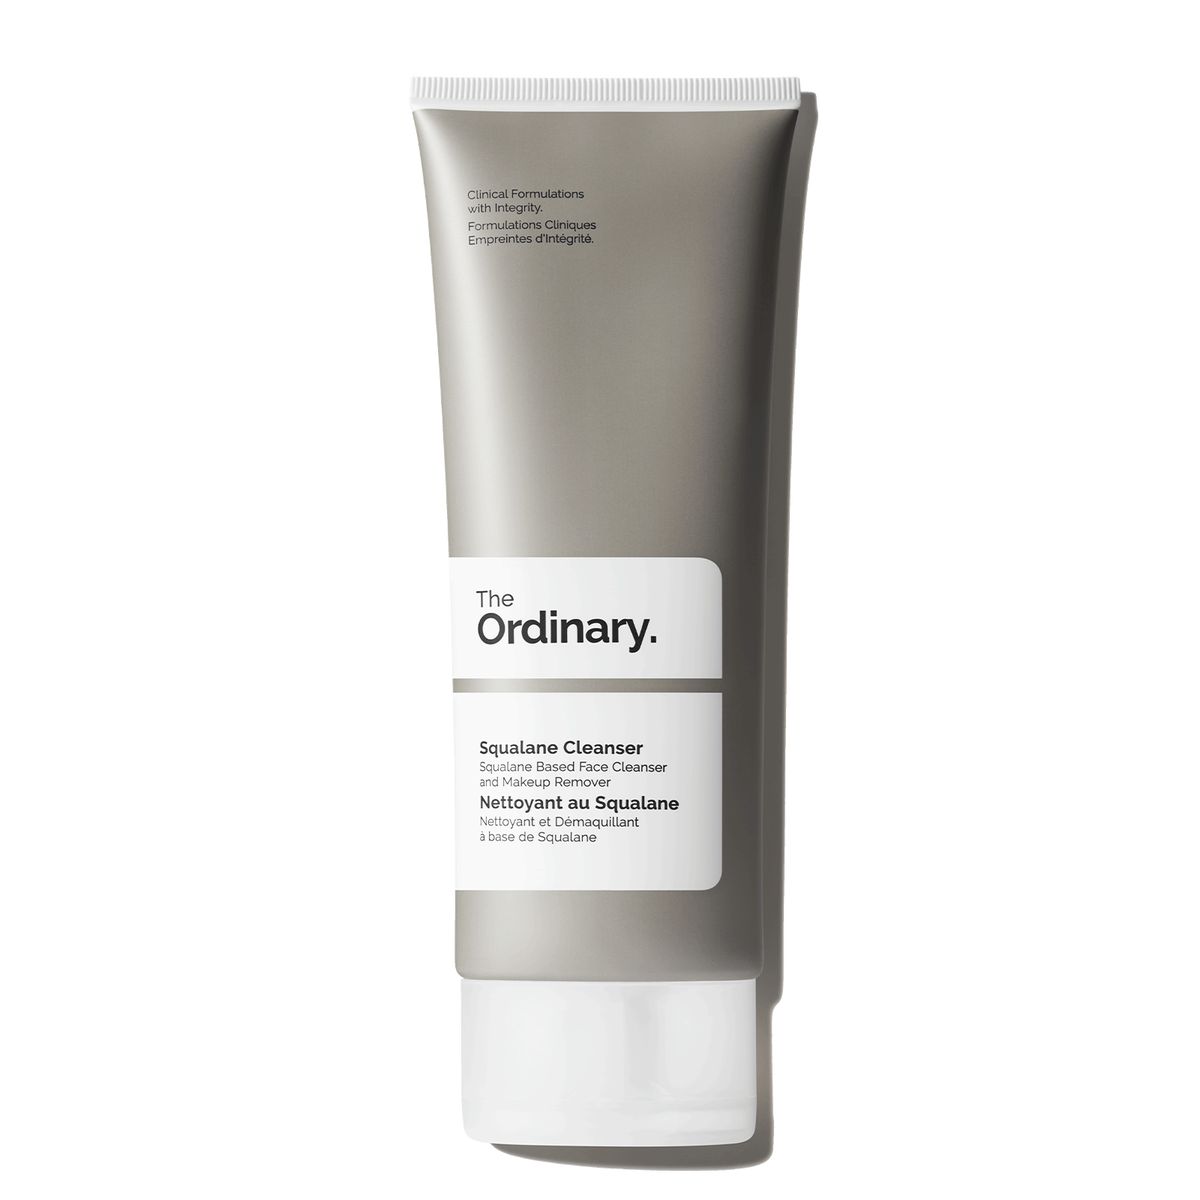 The Ordinary Squalane CleanserSqualane Cleanser | The Ordinary